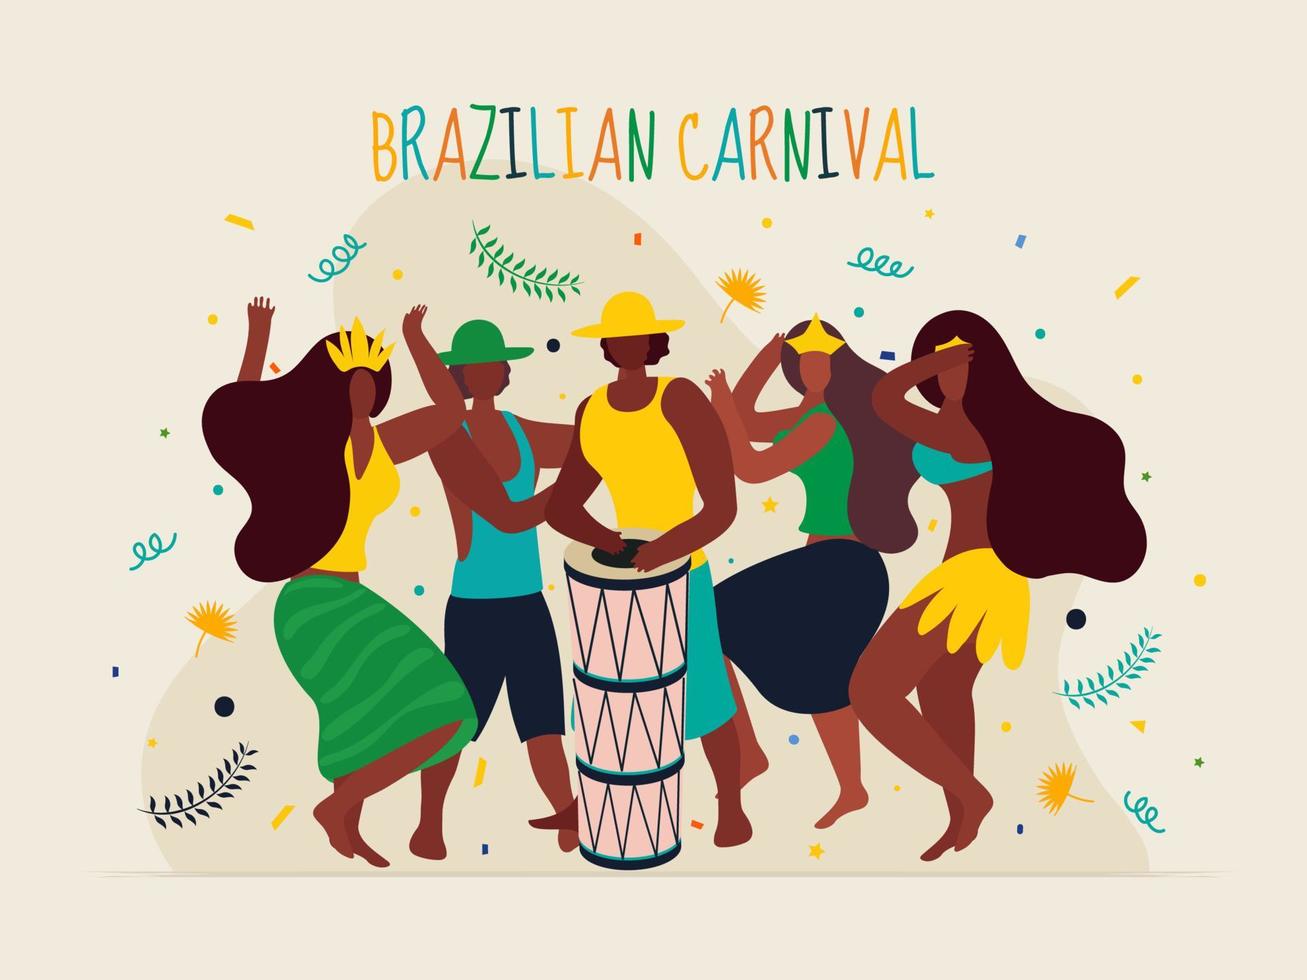 Brazil People Dancing with Drum Instrument on White Background for Brazilian Carnival Celebration. vector